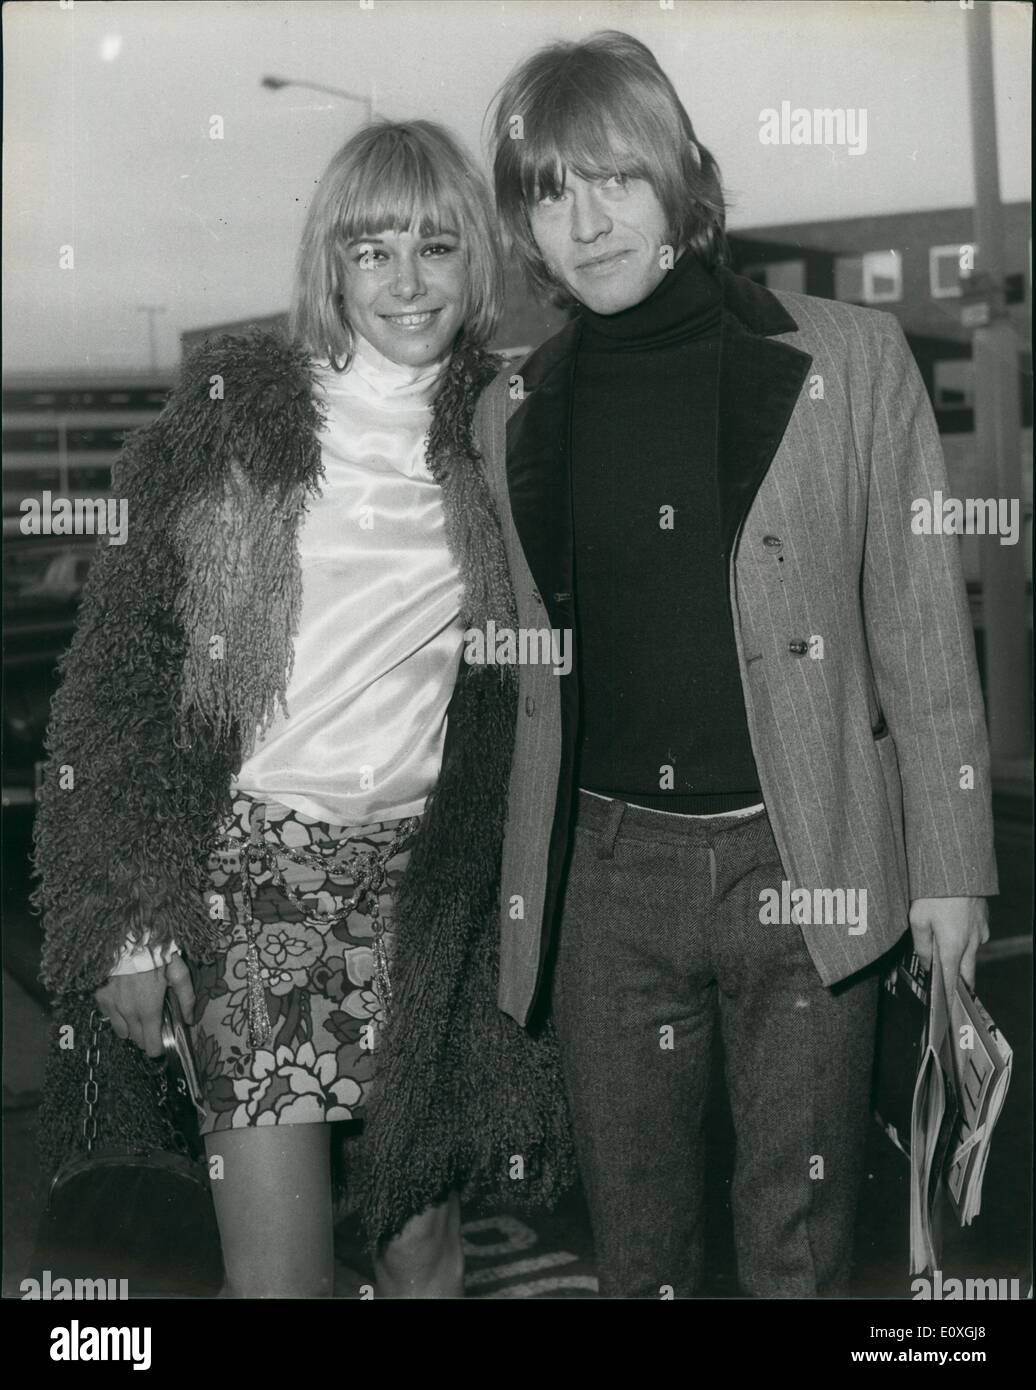 Dec. 12, 1966 - German Actress arrives by Air after Rumours that she is to marry Brian Jones of Rolling Stones: Blonde German actress Anita Pallenberg, age 19,   London today following rumours that she is about to marry the Rolling Stones guitarist, Brian Jones. She was met on arrival at London Airport today by Brian. Photo shows German actress Anita Pallenberg pictured with Brian Jones when she flew into London Airport from Munich today. Stock Photo